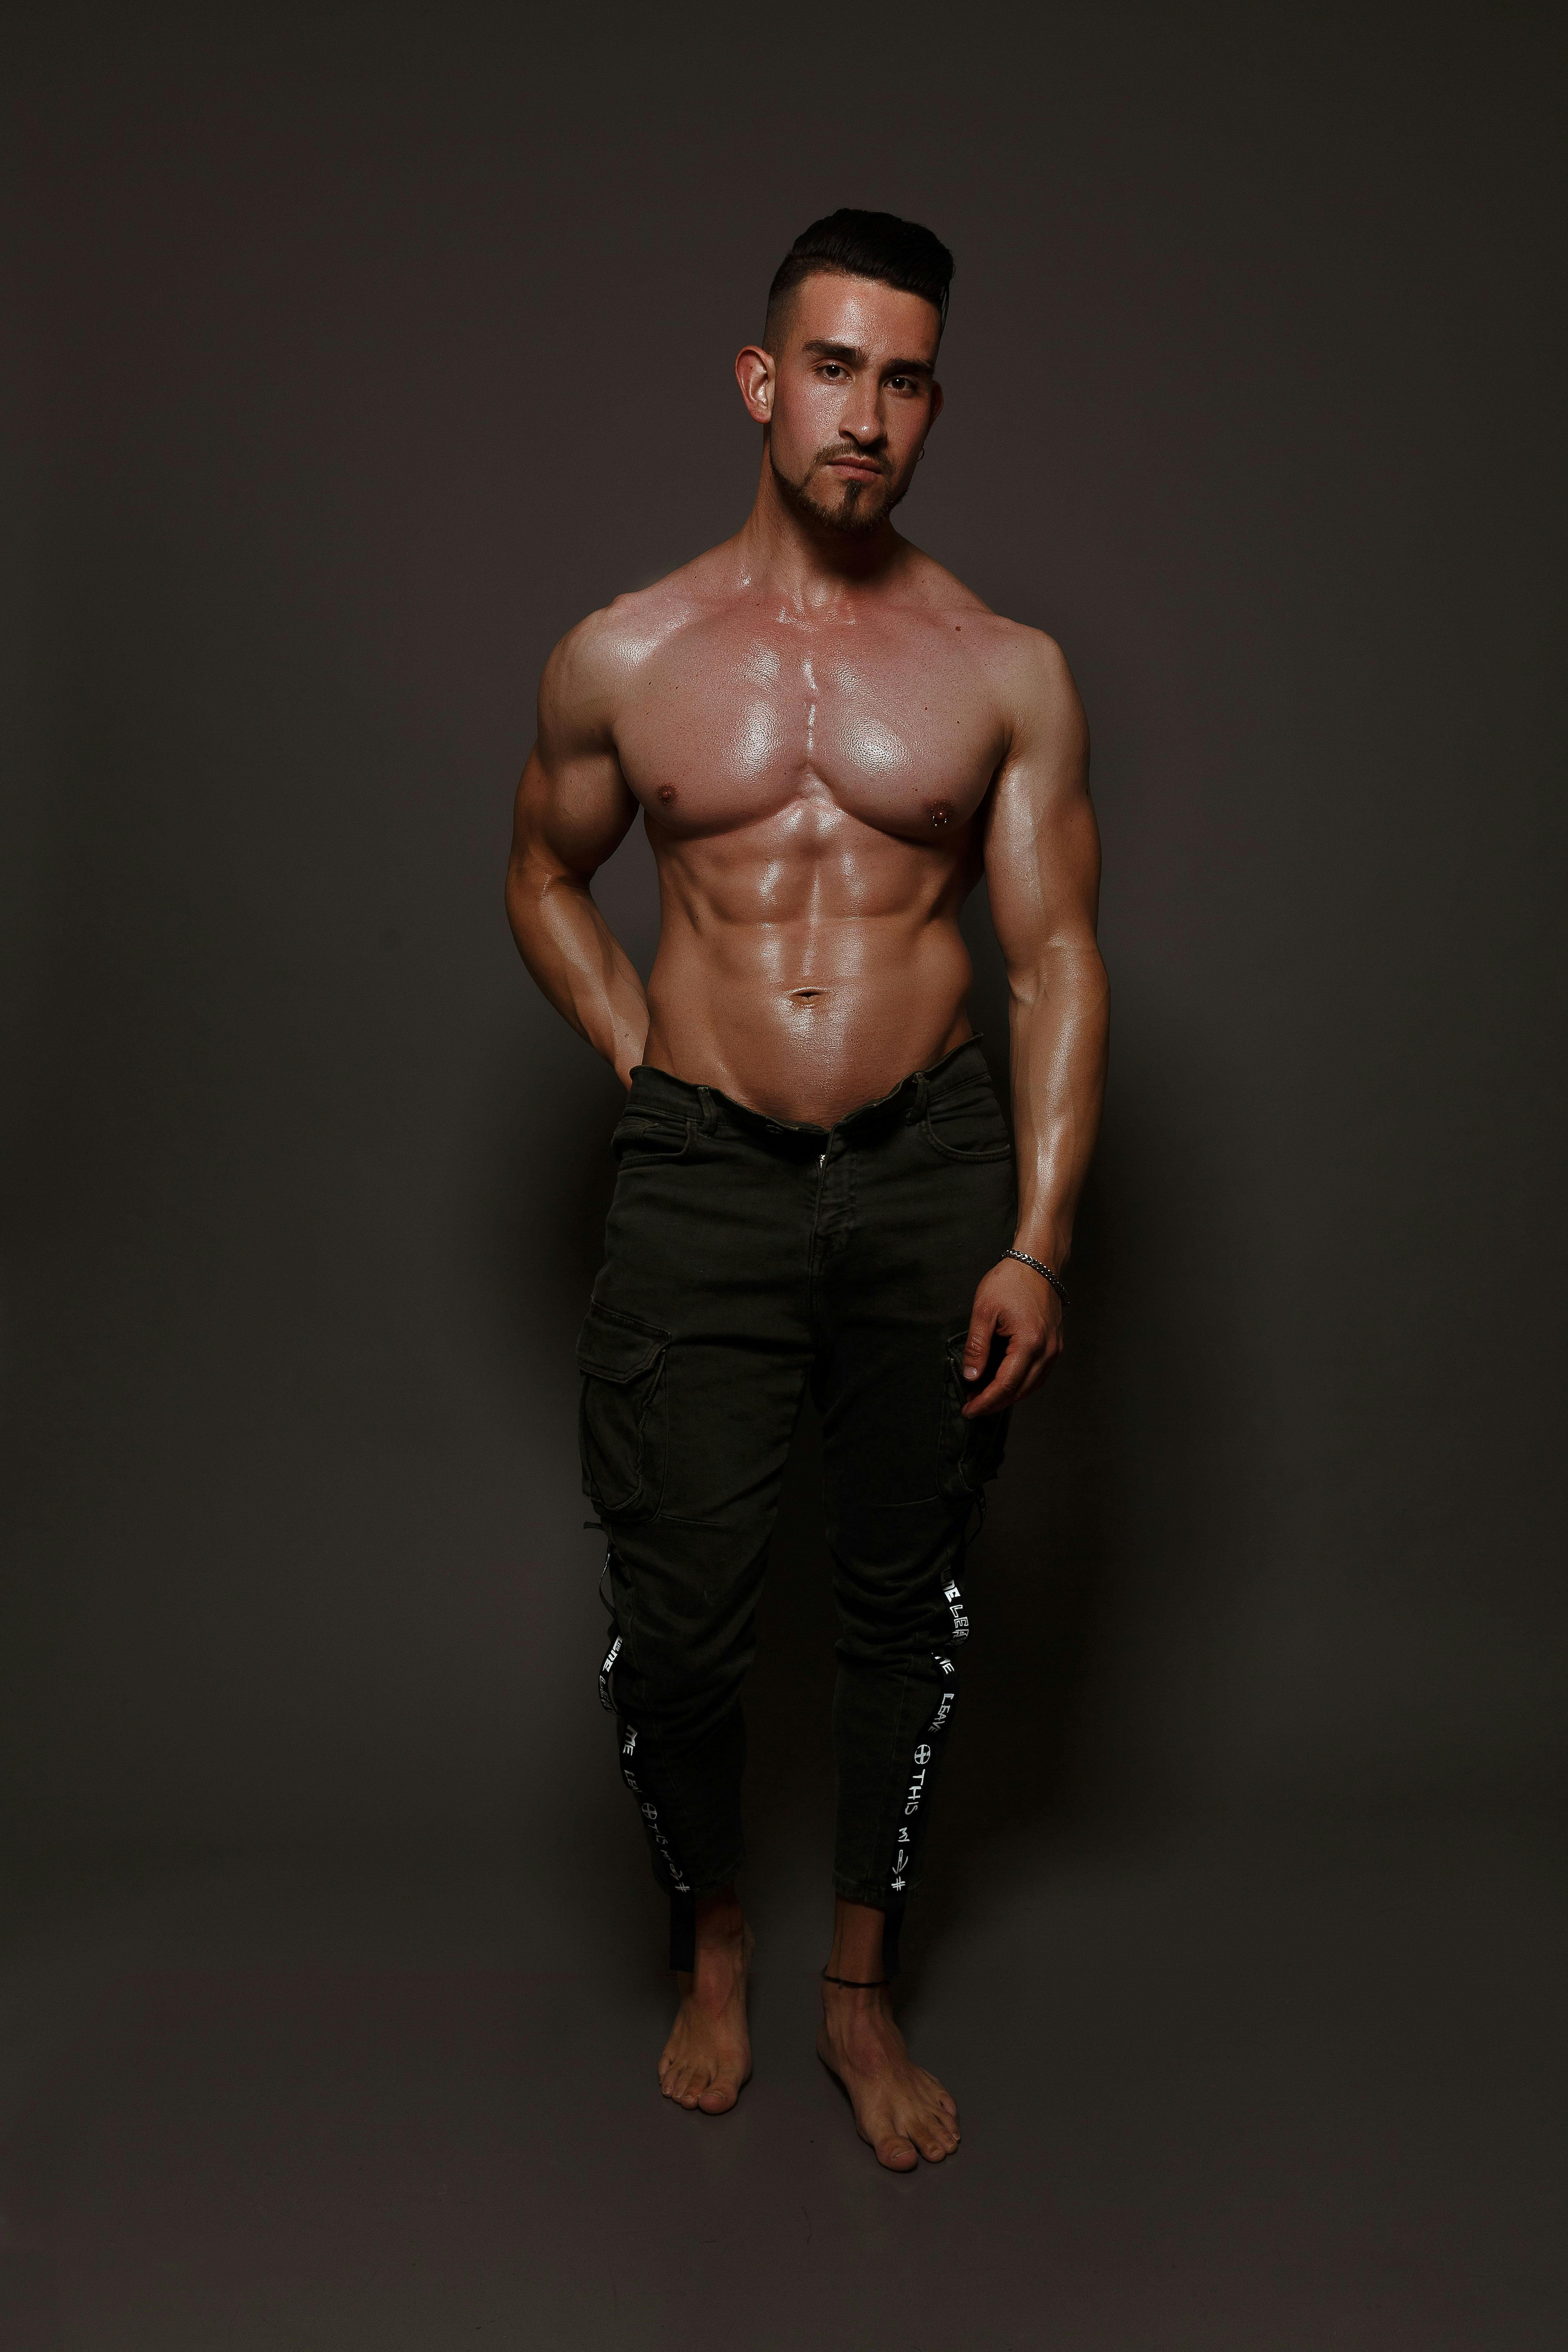 Male Fitness Model and Trainer: Kyle Hynick – The Menswear Newsletter